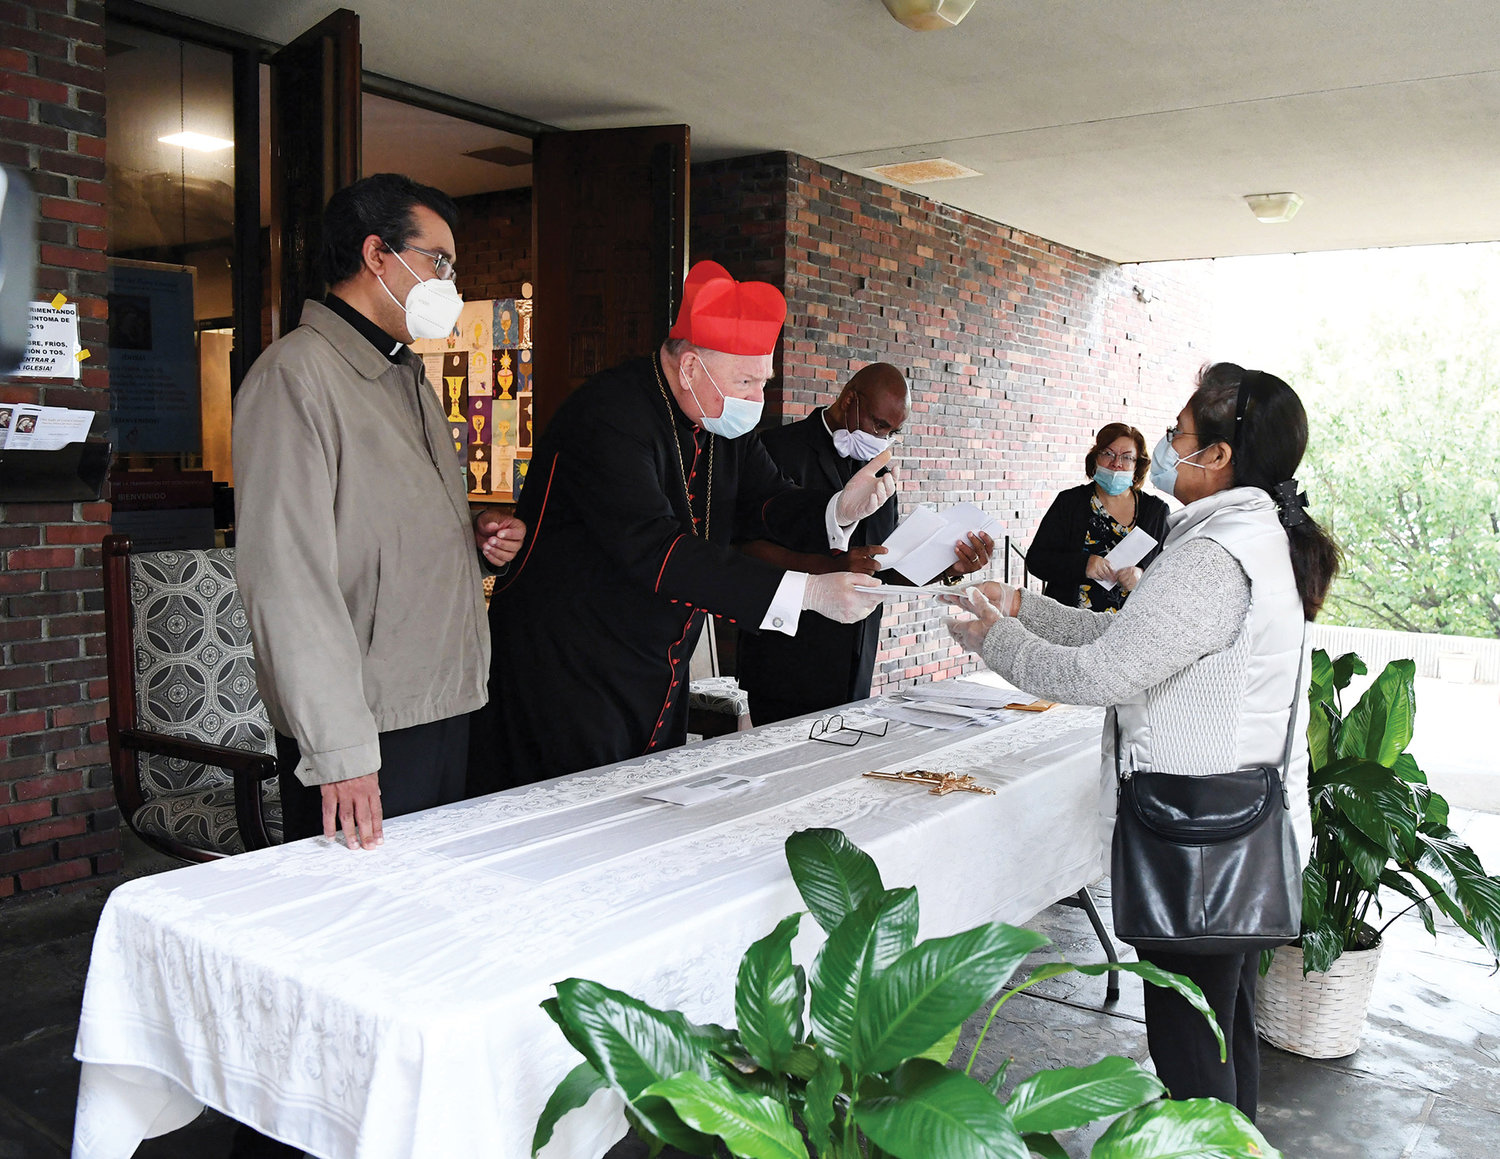 Cardinal Dolan distributes a check to a woman at Our Lady of Good Counsel Church. On the left is Father Eric Cruz, Bronx director of Catholic Charities.